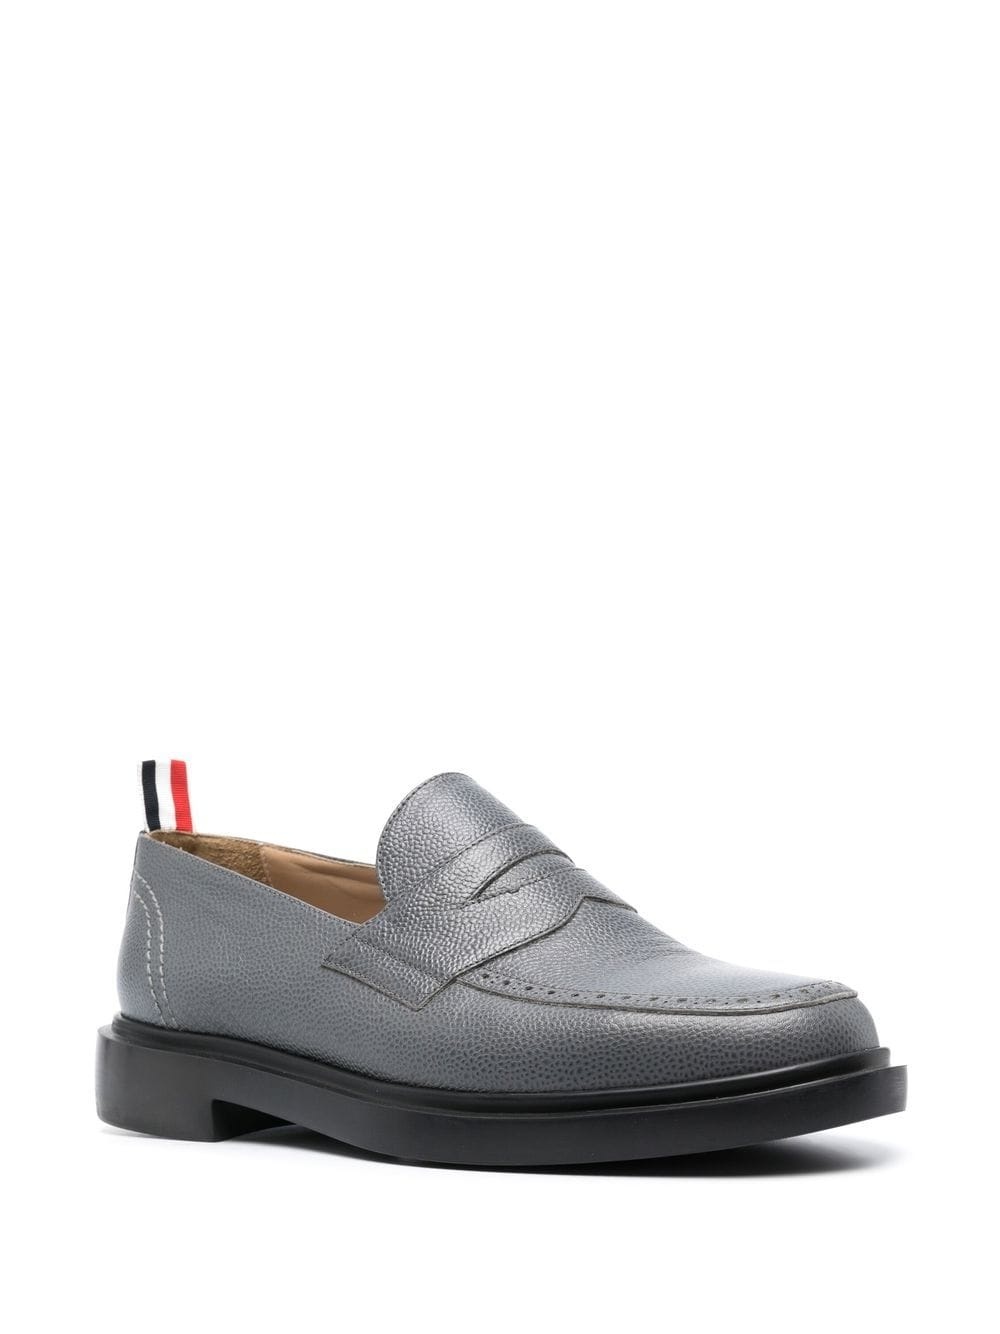 classic penny leather loafers - 2